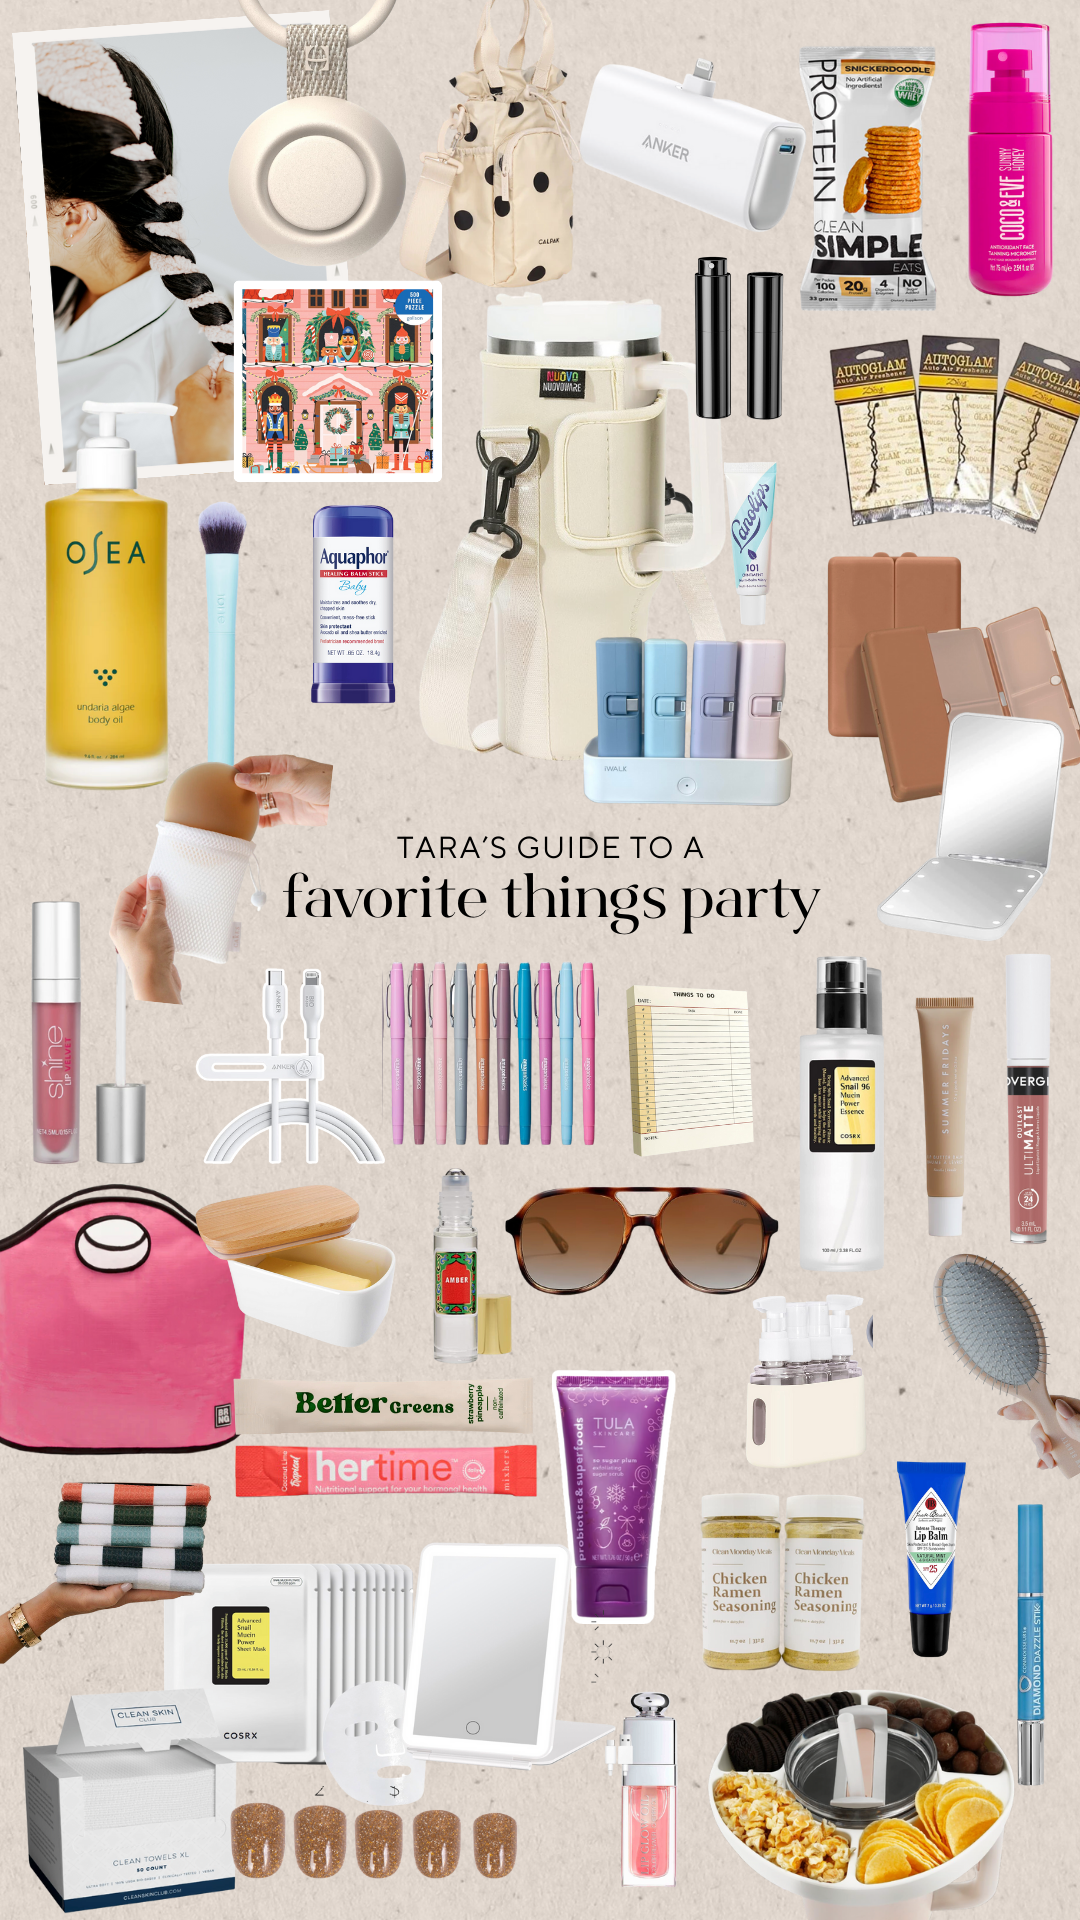 2020 FAVORITE THINGS PARTY, GIFT IDEAS